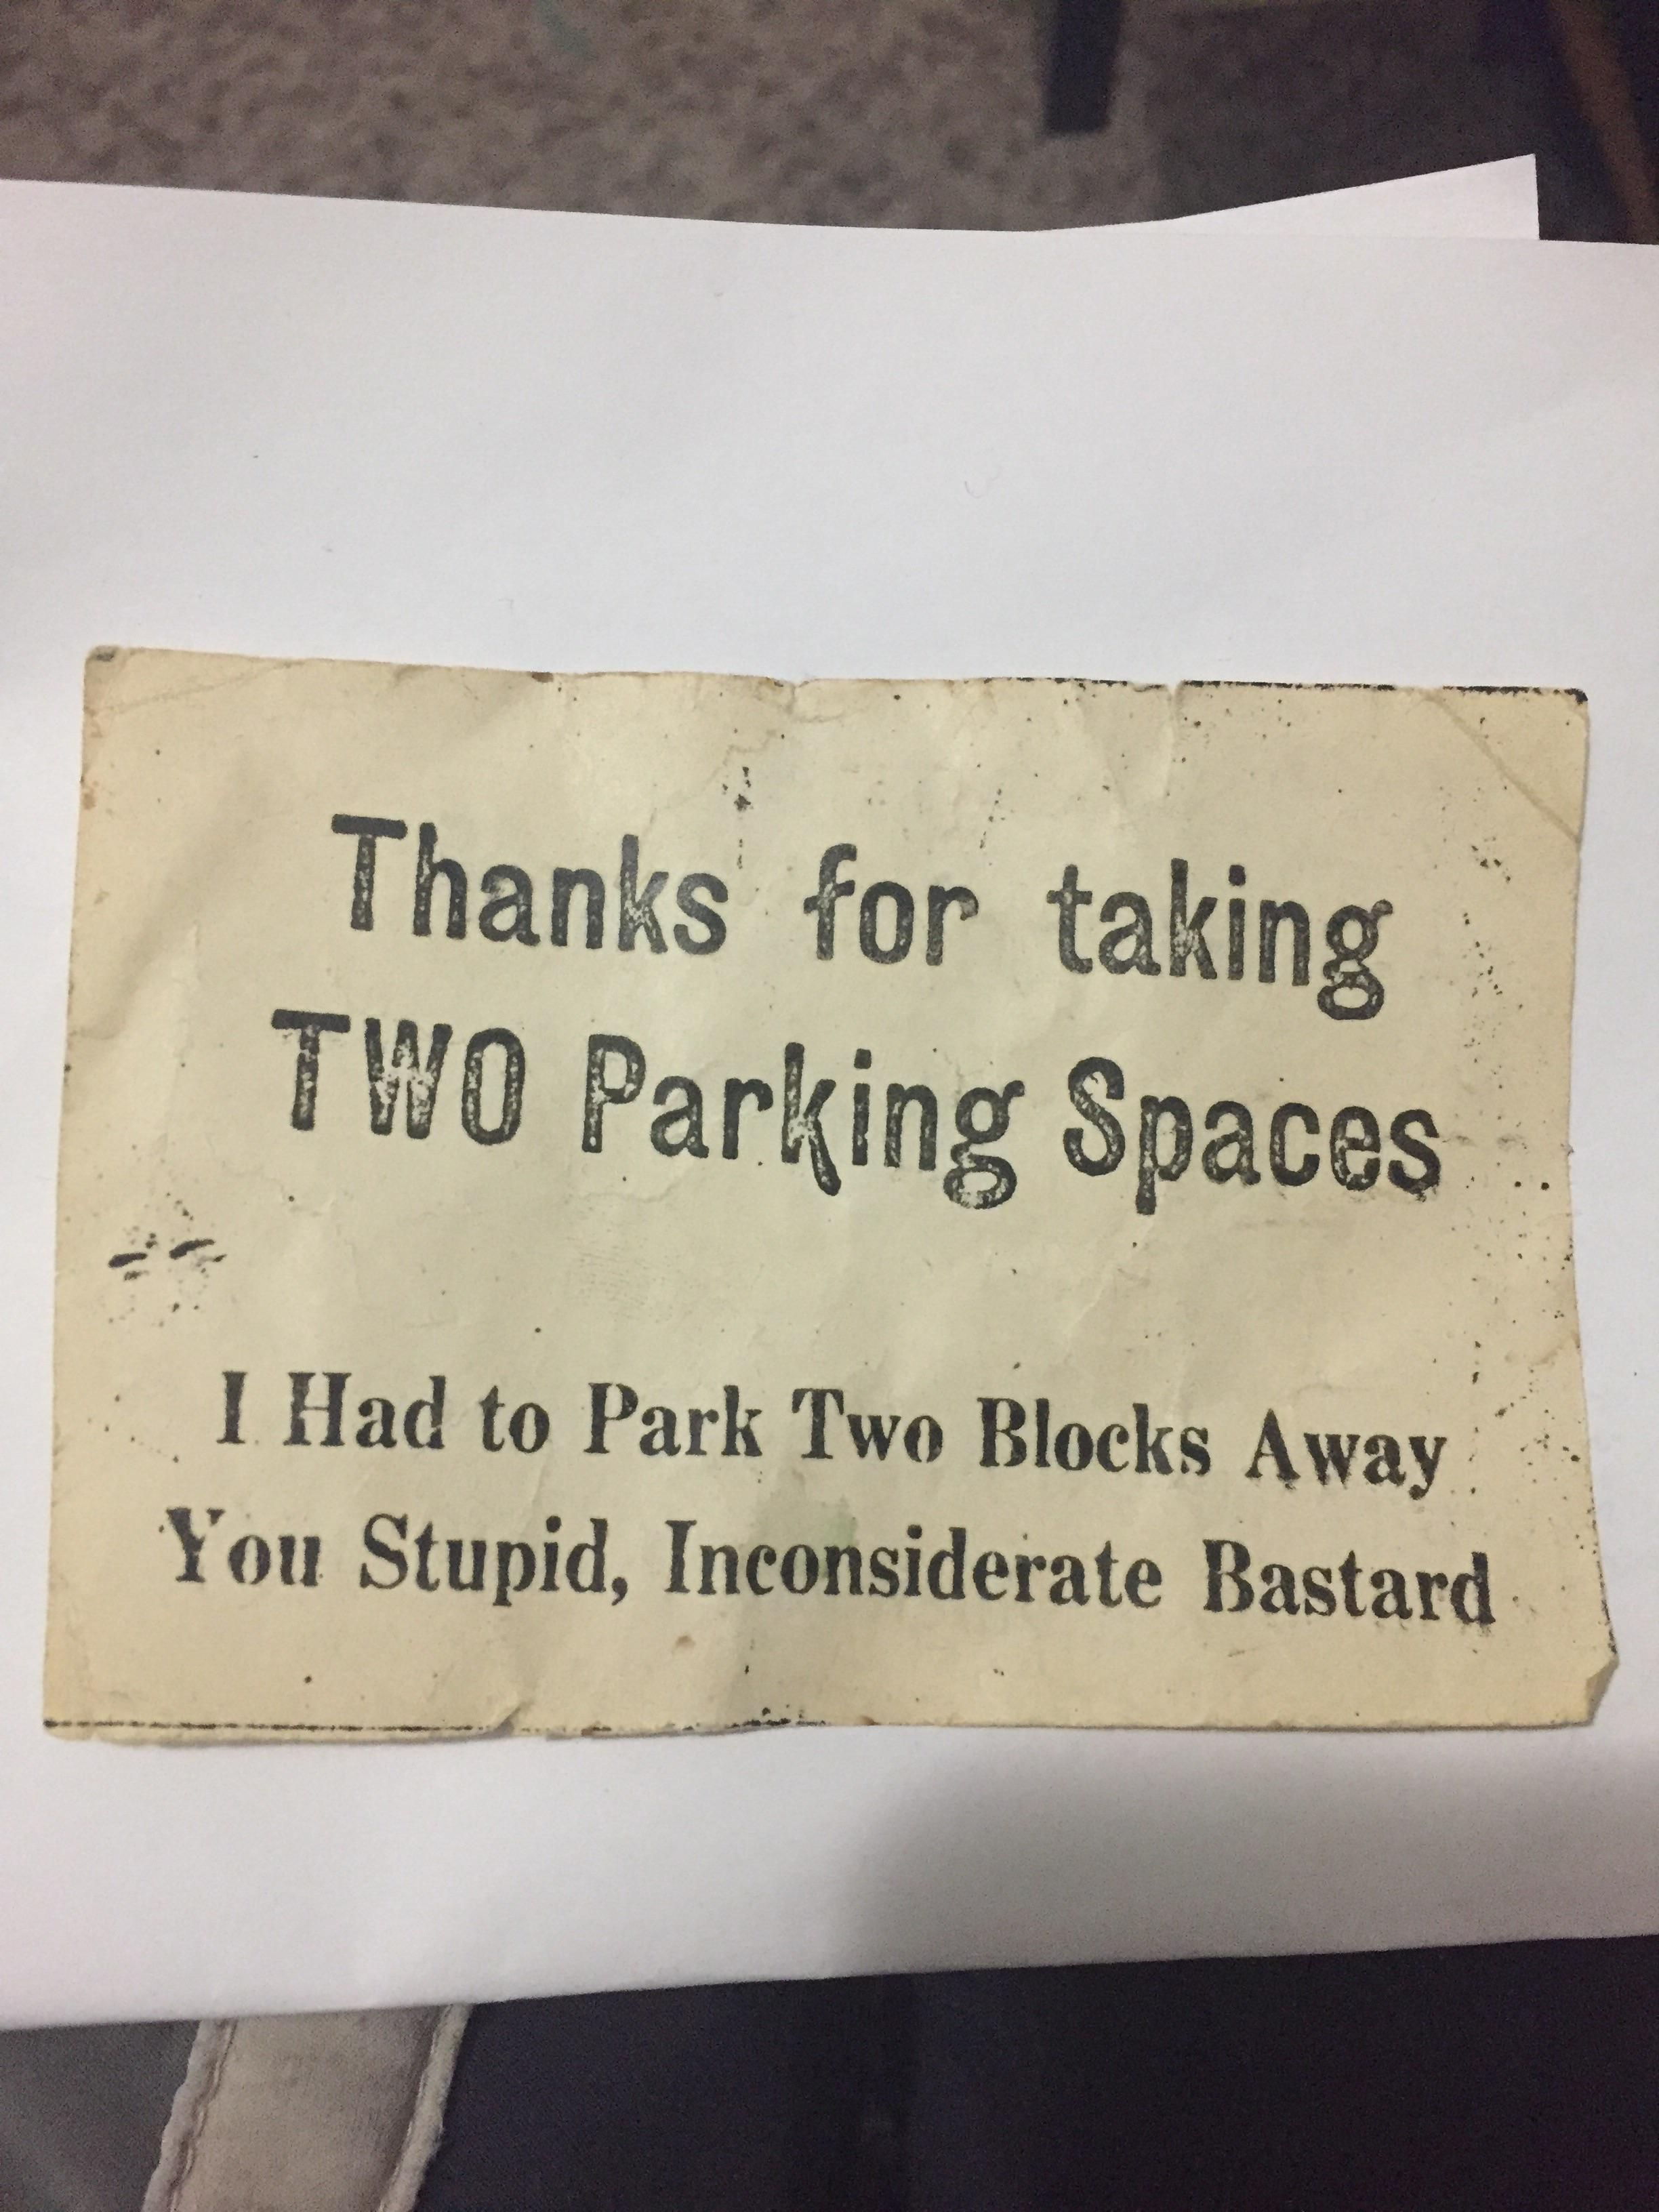 Found about 20 of these cards while cleaning out my grandfathers man cave after he passed away. Going to miss his sense of humour.